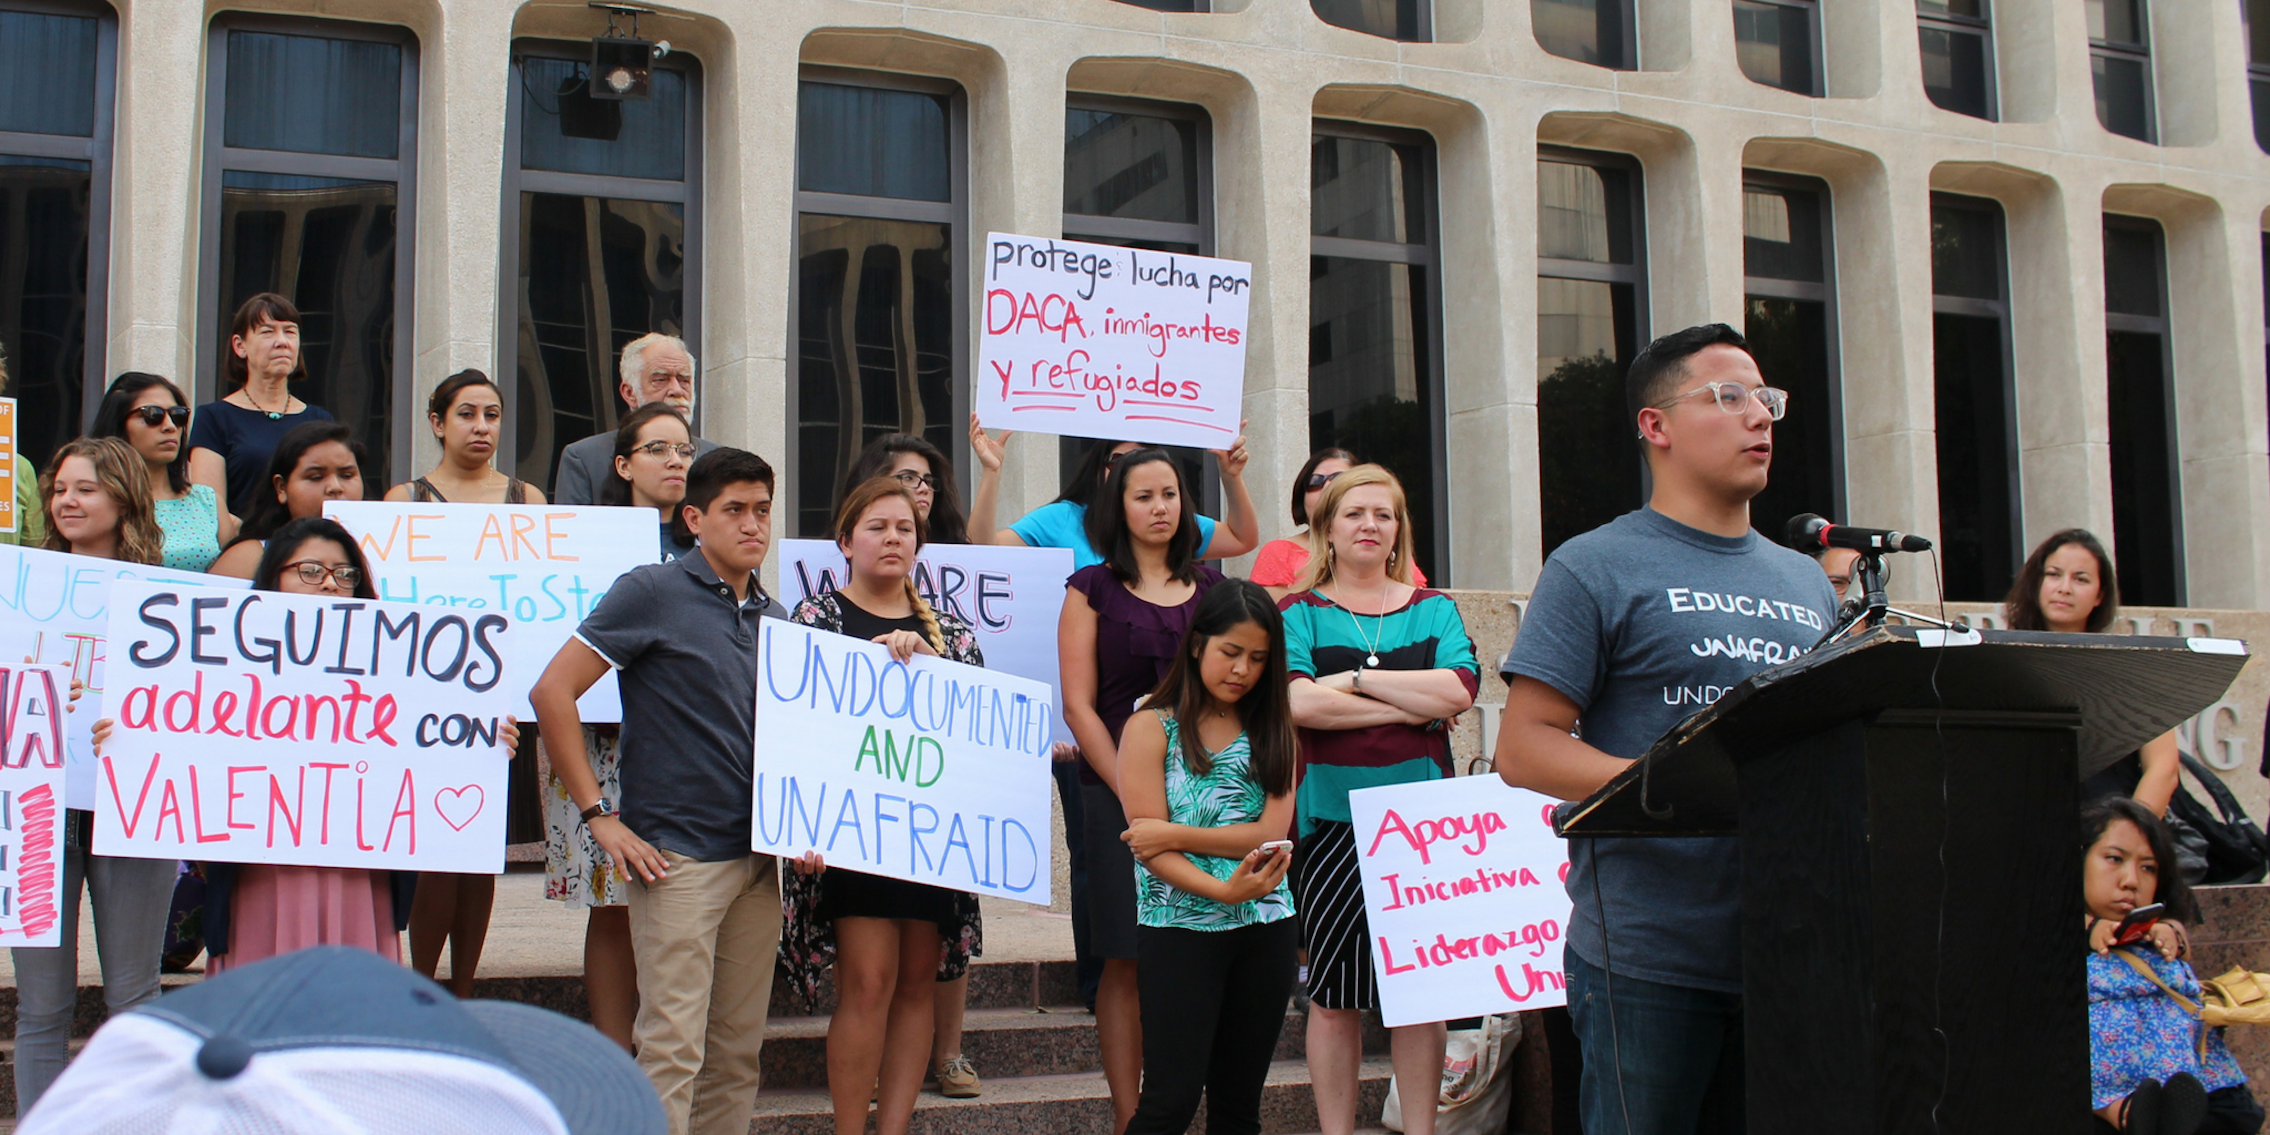 Sam Cervantes, a student leader with UT Austin's University Leadership Initiative, speaks to press at the group's conference regarding President Donald Trump's resignation of the Deferred Action for Childhood Arrivals (DACA) Act on Sept. 5, 2017 in Austin, Texas.